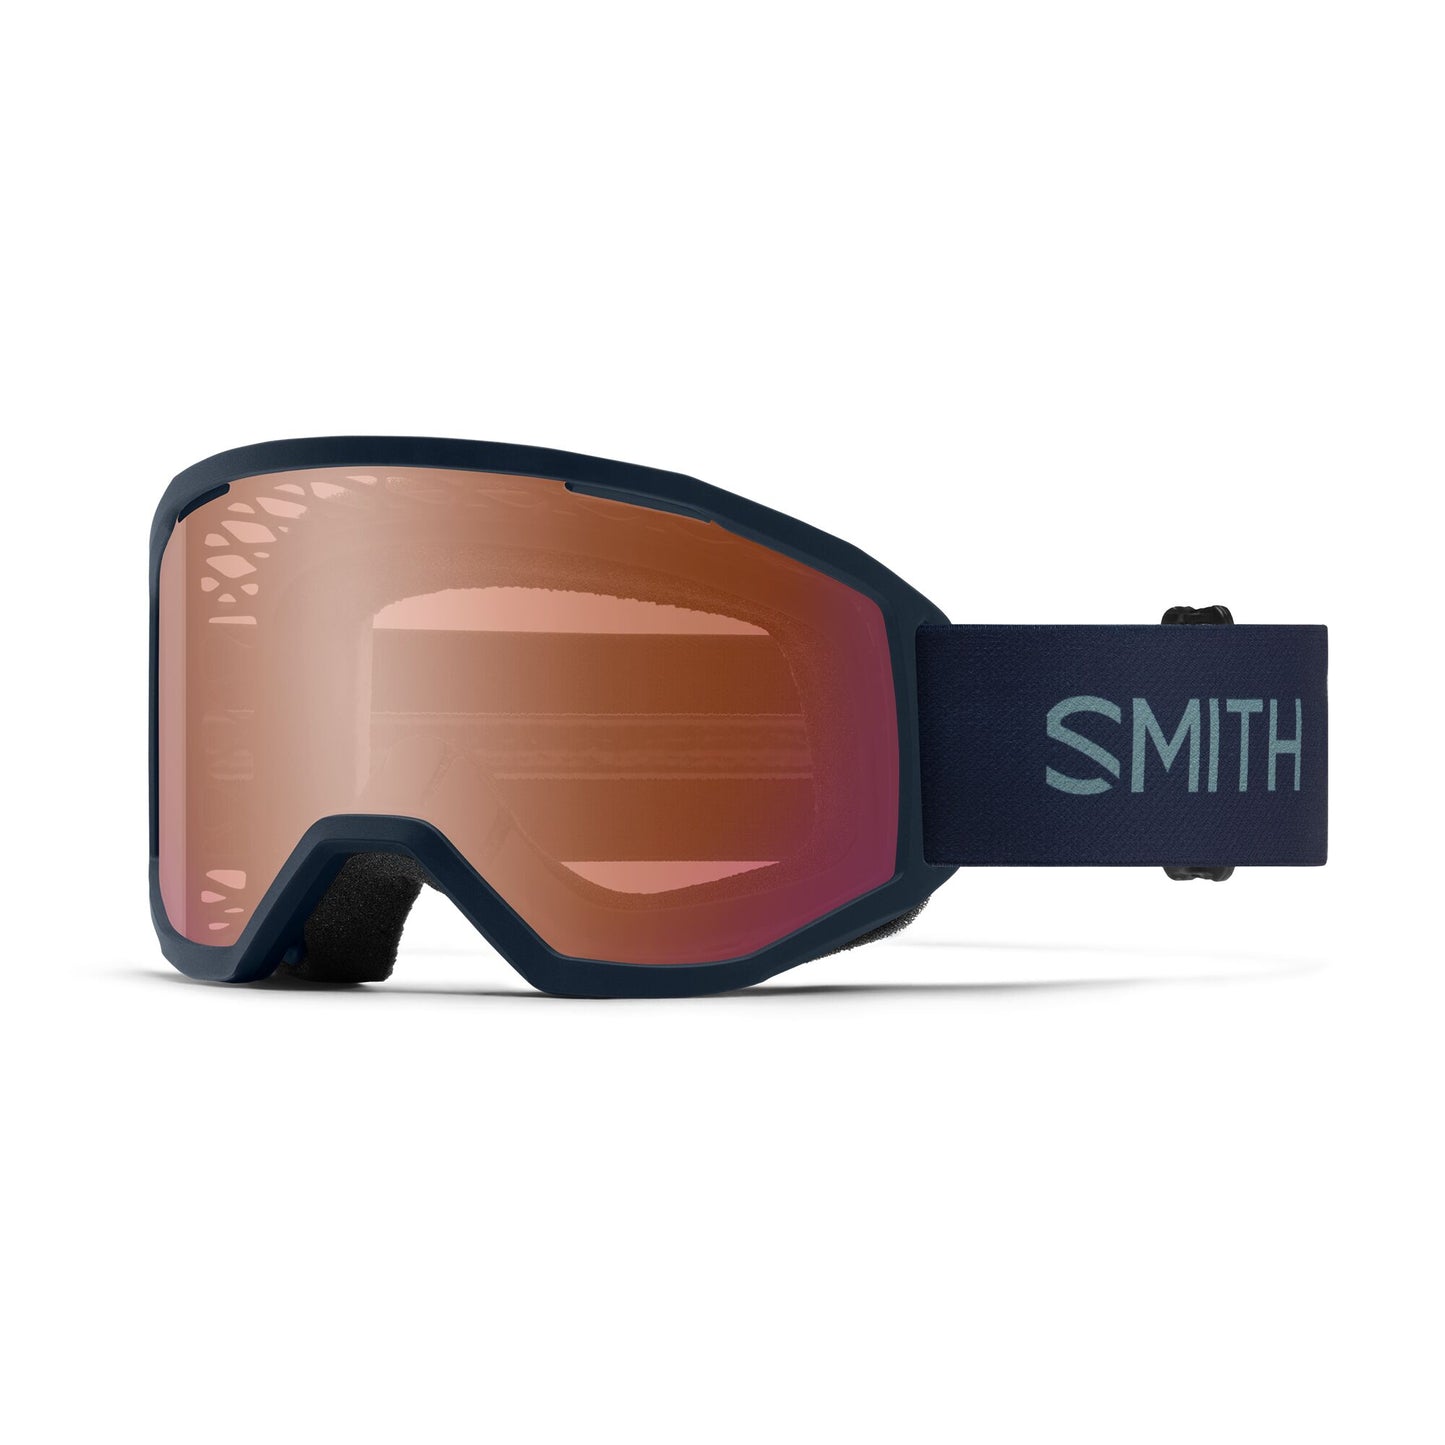 Smith Loam Goggles - One Size Fits Most - Midnight Navy - Contrast Rose Flash AF Lens